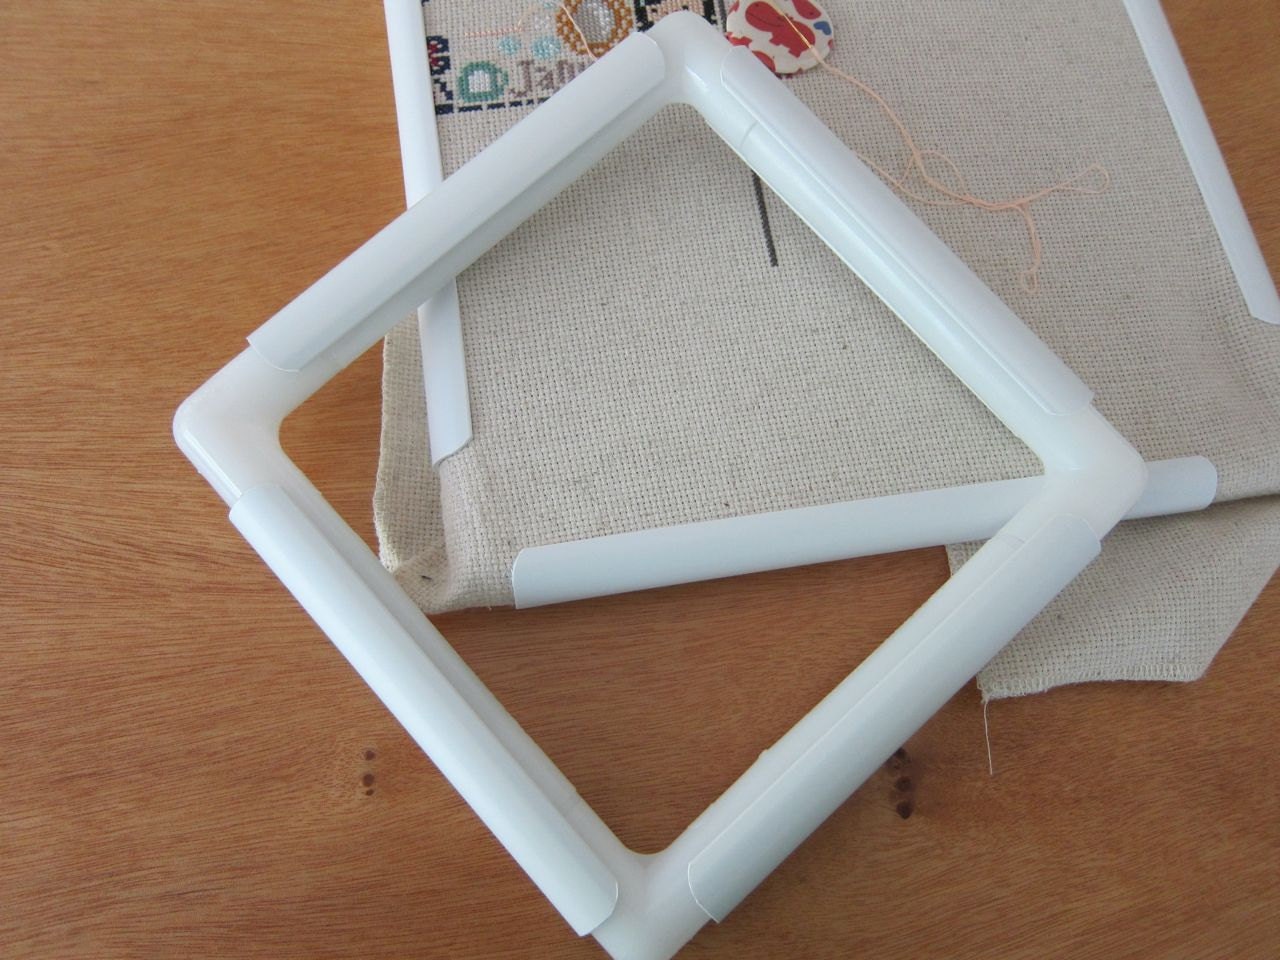 17 X 17 Plastic Cross Stitch Frame Square Embroidery Hoop White DIY Sewing  Tools Sewing Hoop Handhold Craft Clip Embroidery Snap Frame Hoop for Cross